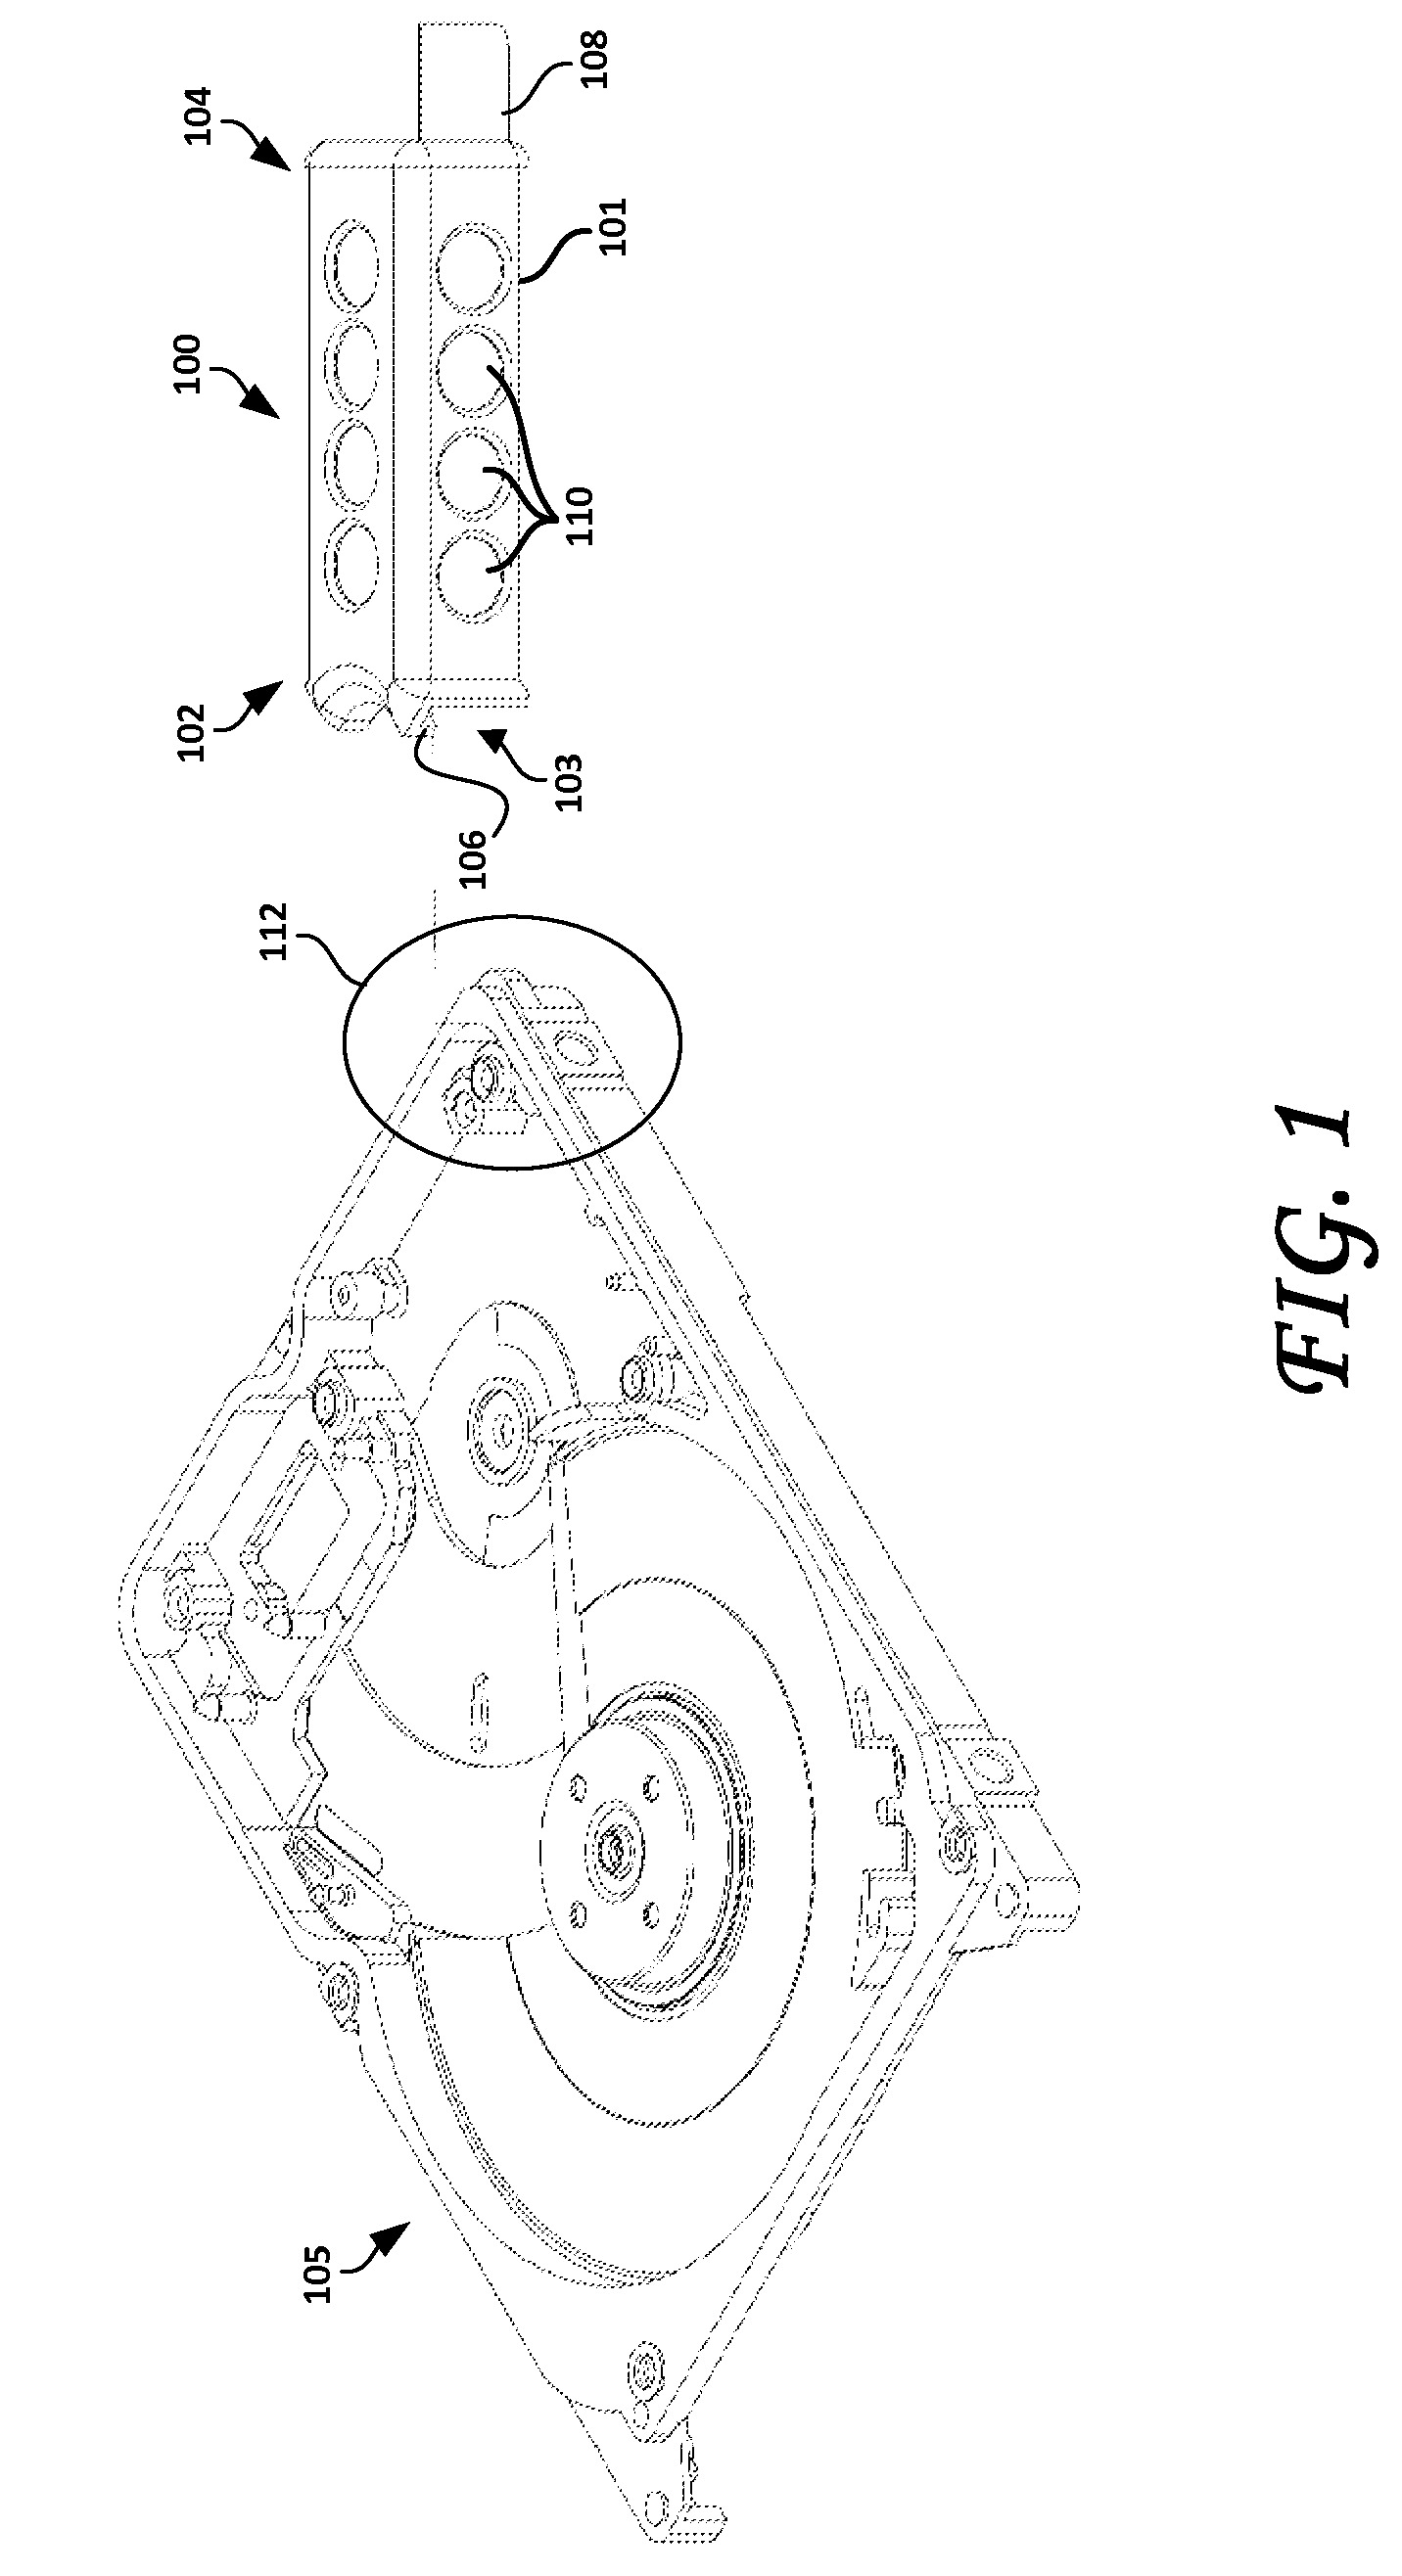 Methods and apparatus for minimizing contamination in hard disk drive assembly processes